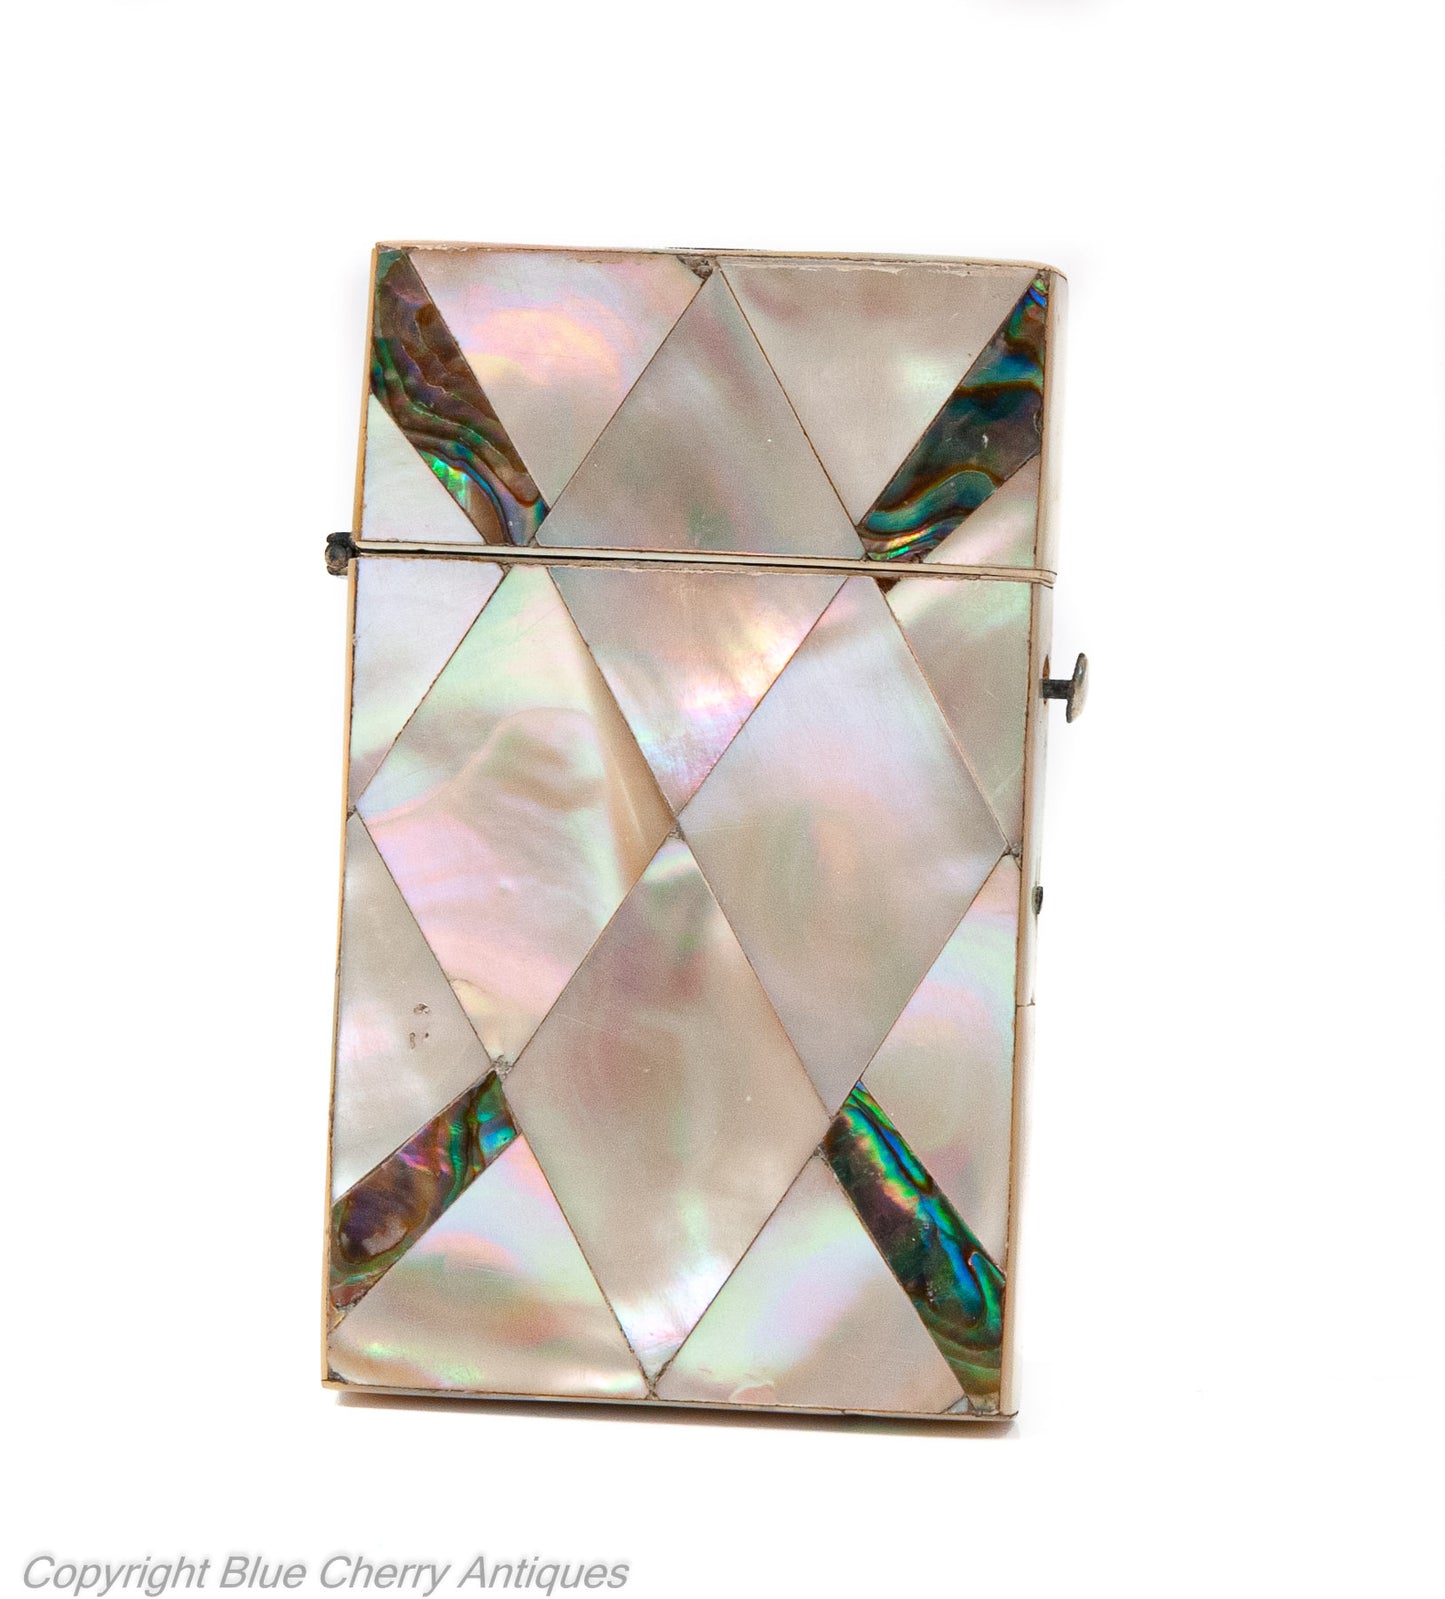 Antique Victorian Period Mother of Pearl and Abalone Shell Calling Card Case (Code 1921)